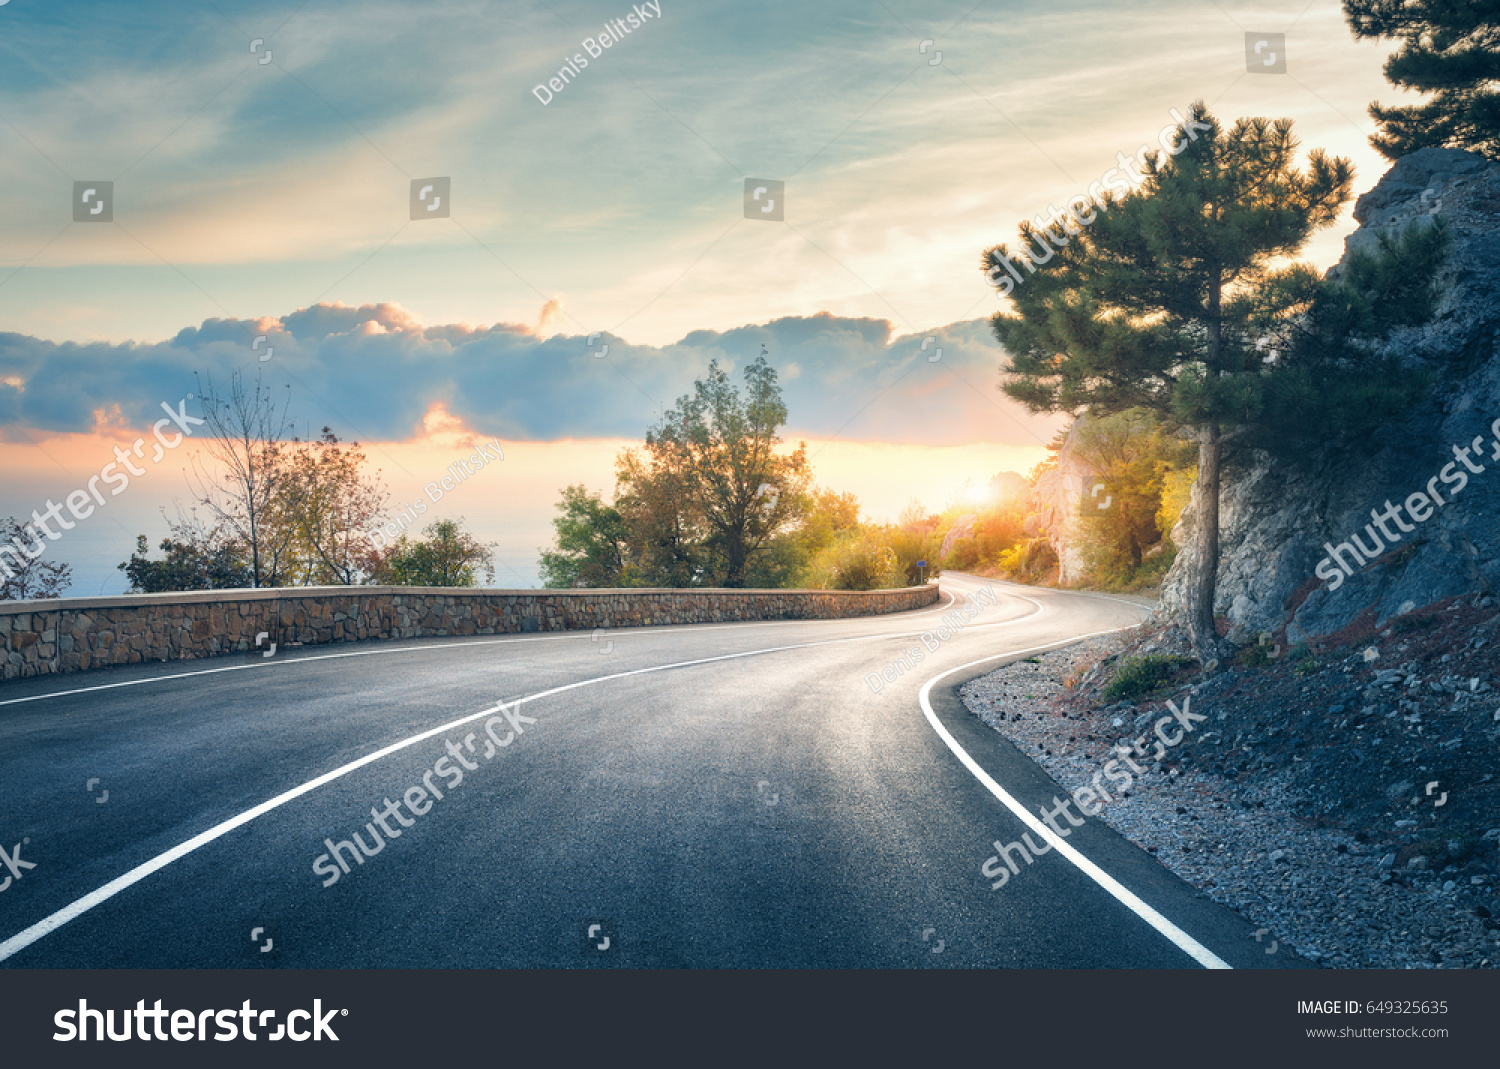 Mountain road. Landscape with rocks, sunny sky with clouds and beautiful asphalt road in the evening in summer. Vintage toning. Travel background. Highway in mountains. Transportation #649325635